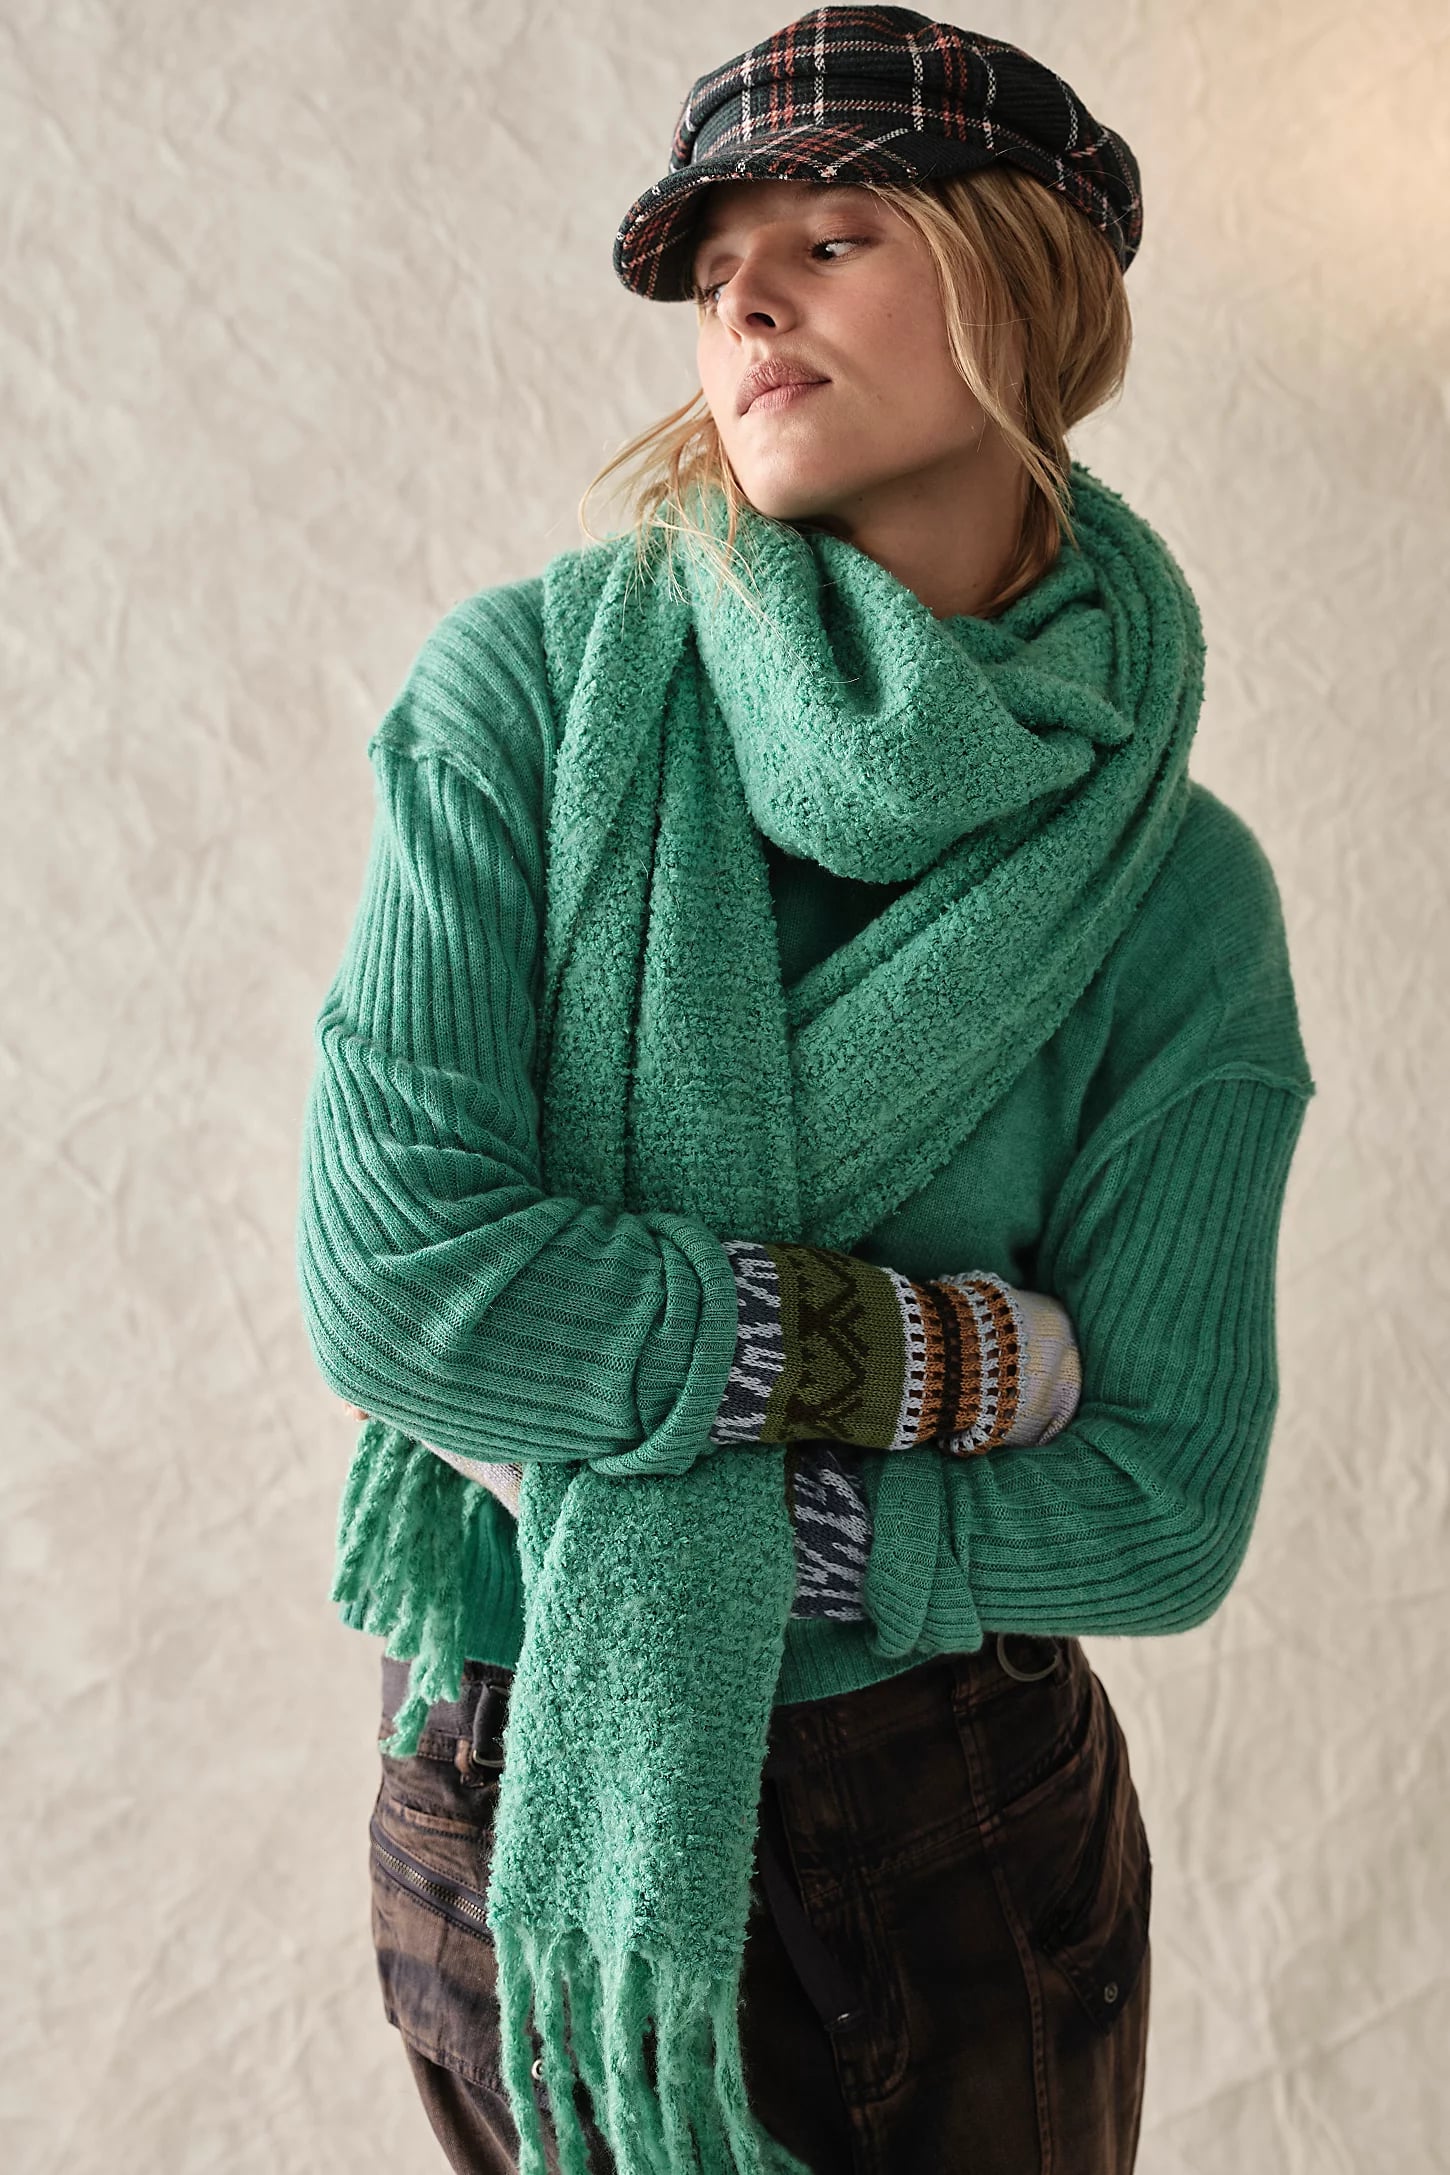 A Blanket Scarf Is Your Quickest – And Cosiest – Route To Autumn Chic